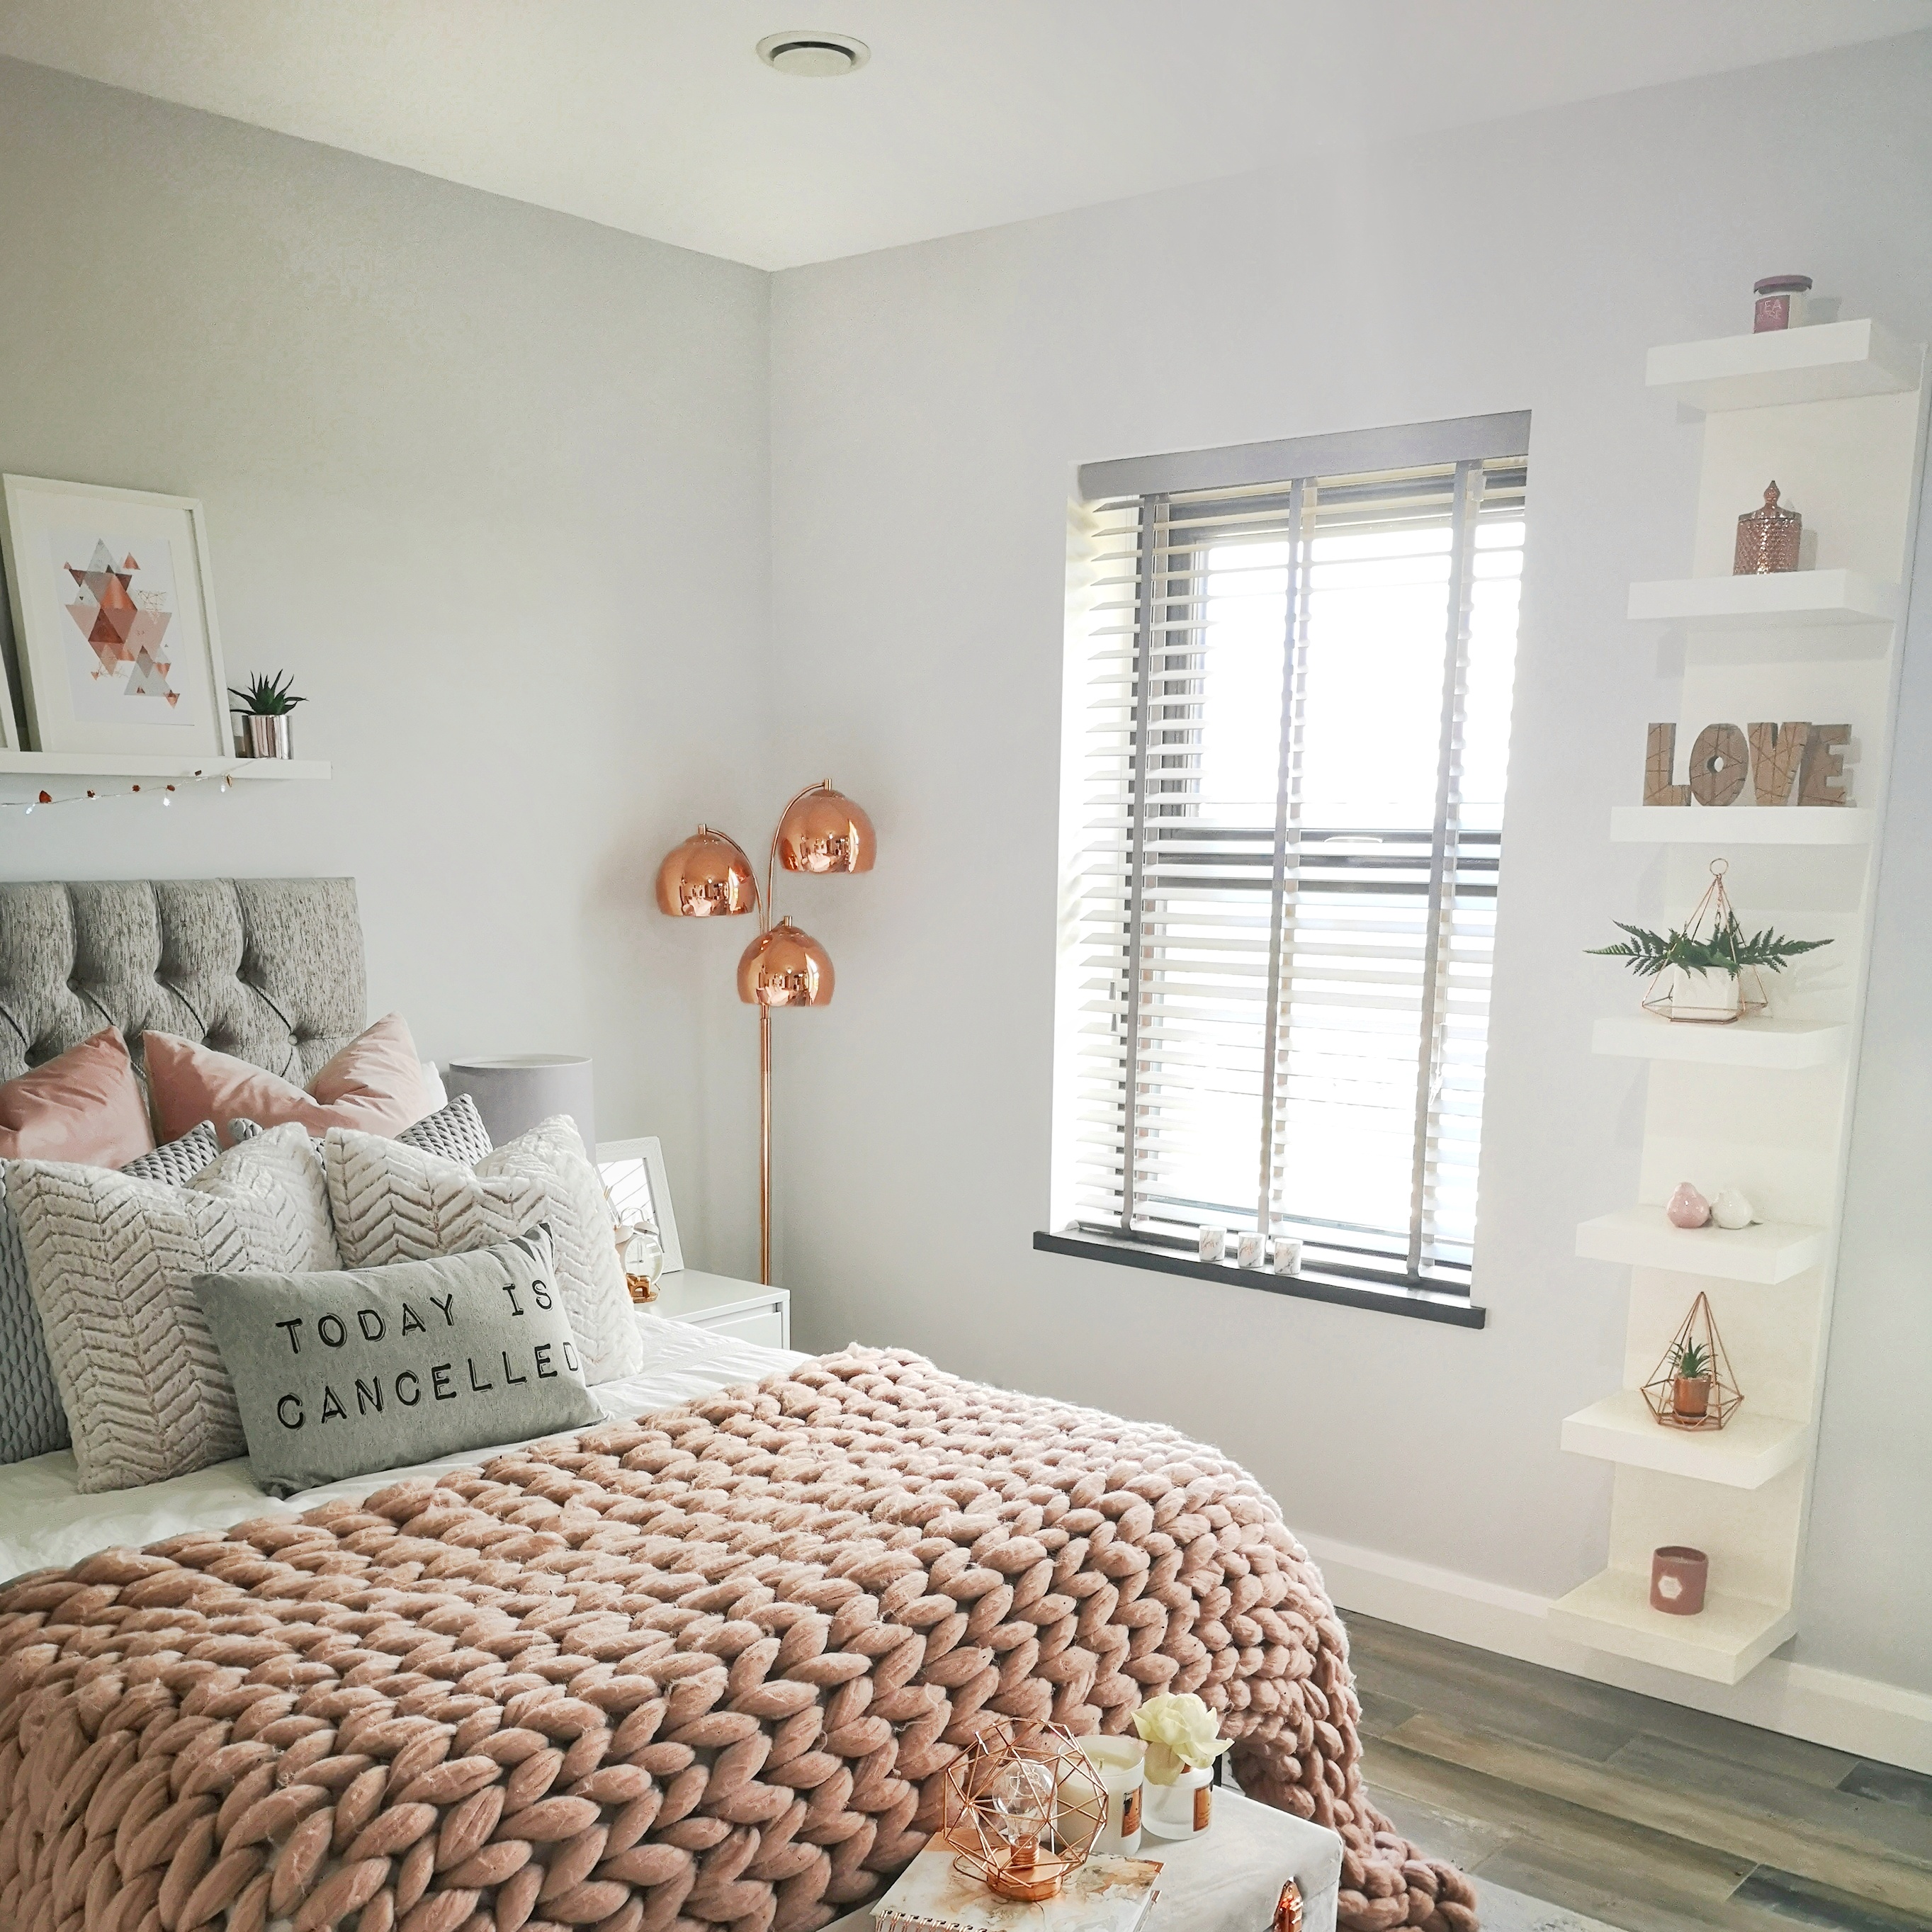 Pink and grey bedroom with mechanical ventilation valve on ceiling